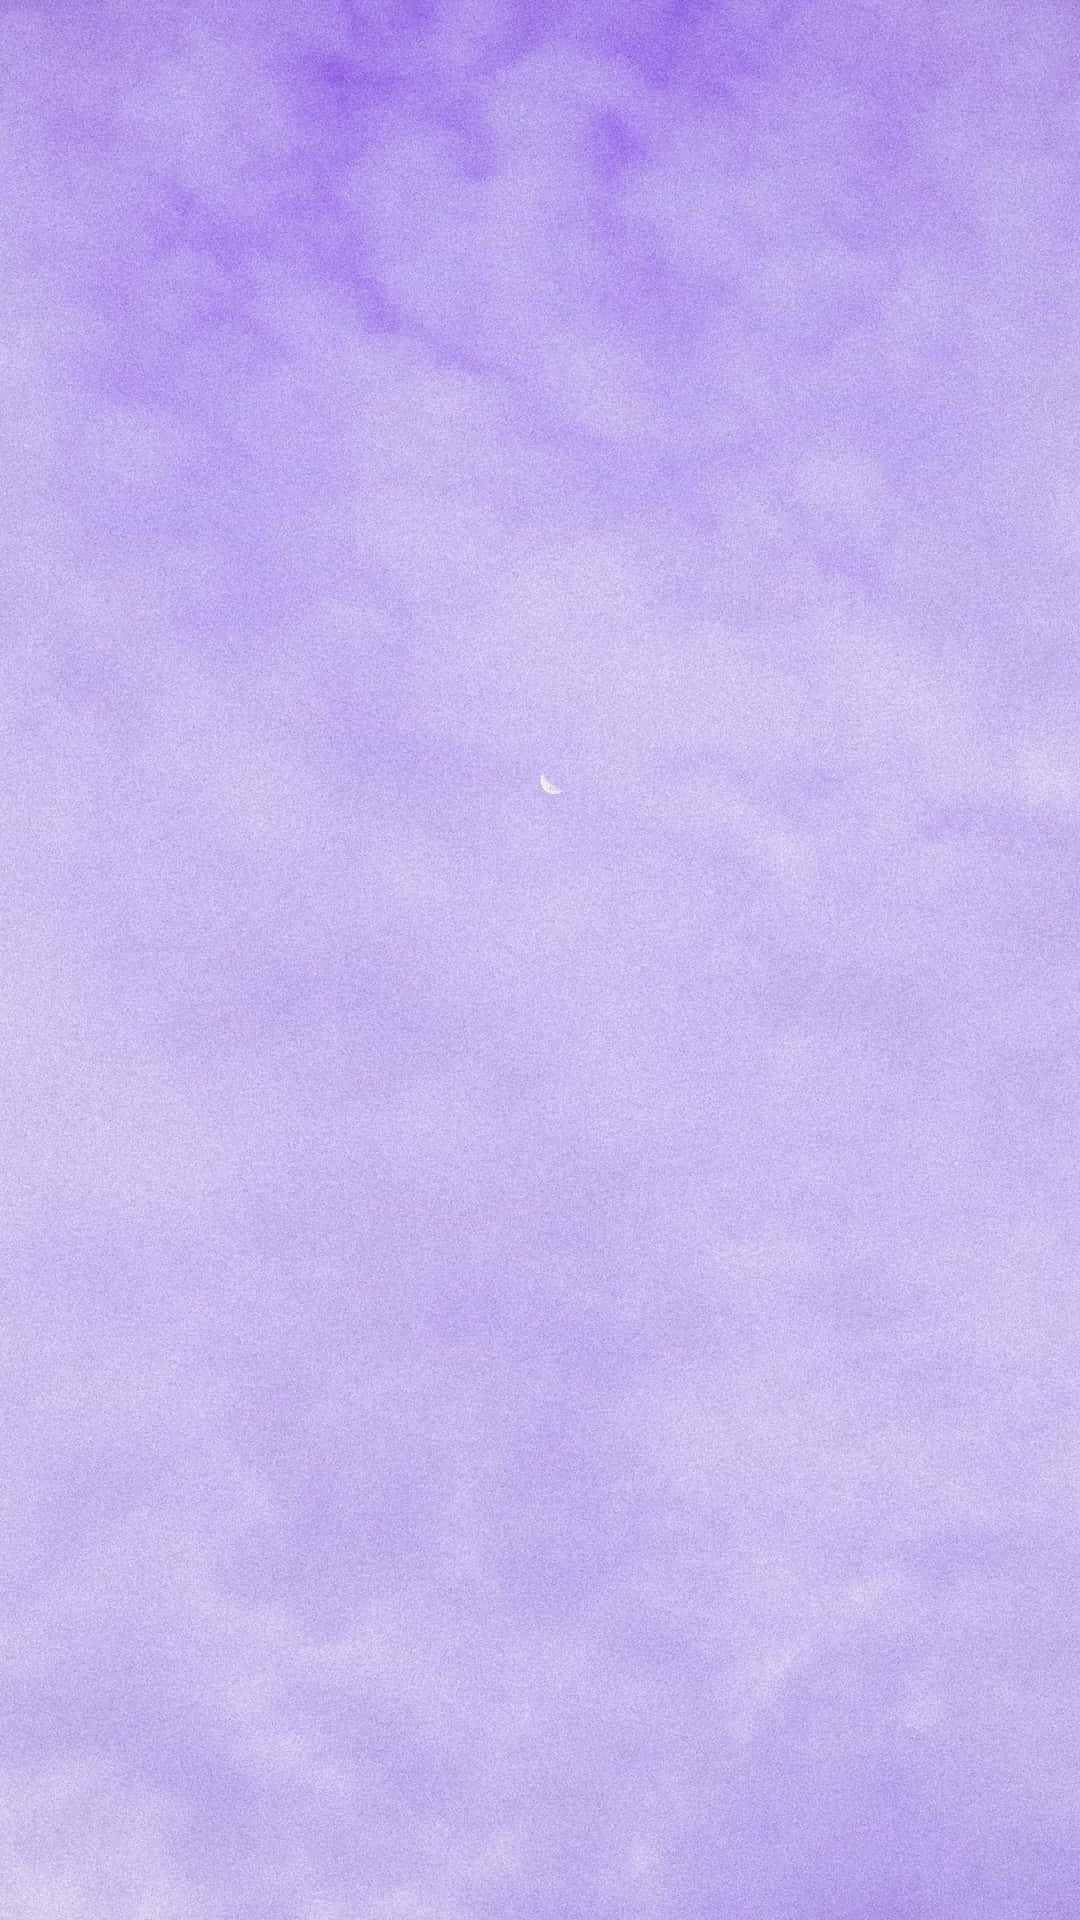 Make A Statement With This Pastel Purple Iphone Background